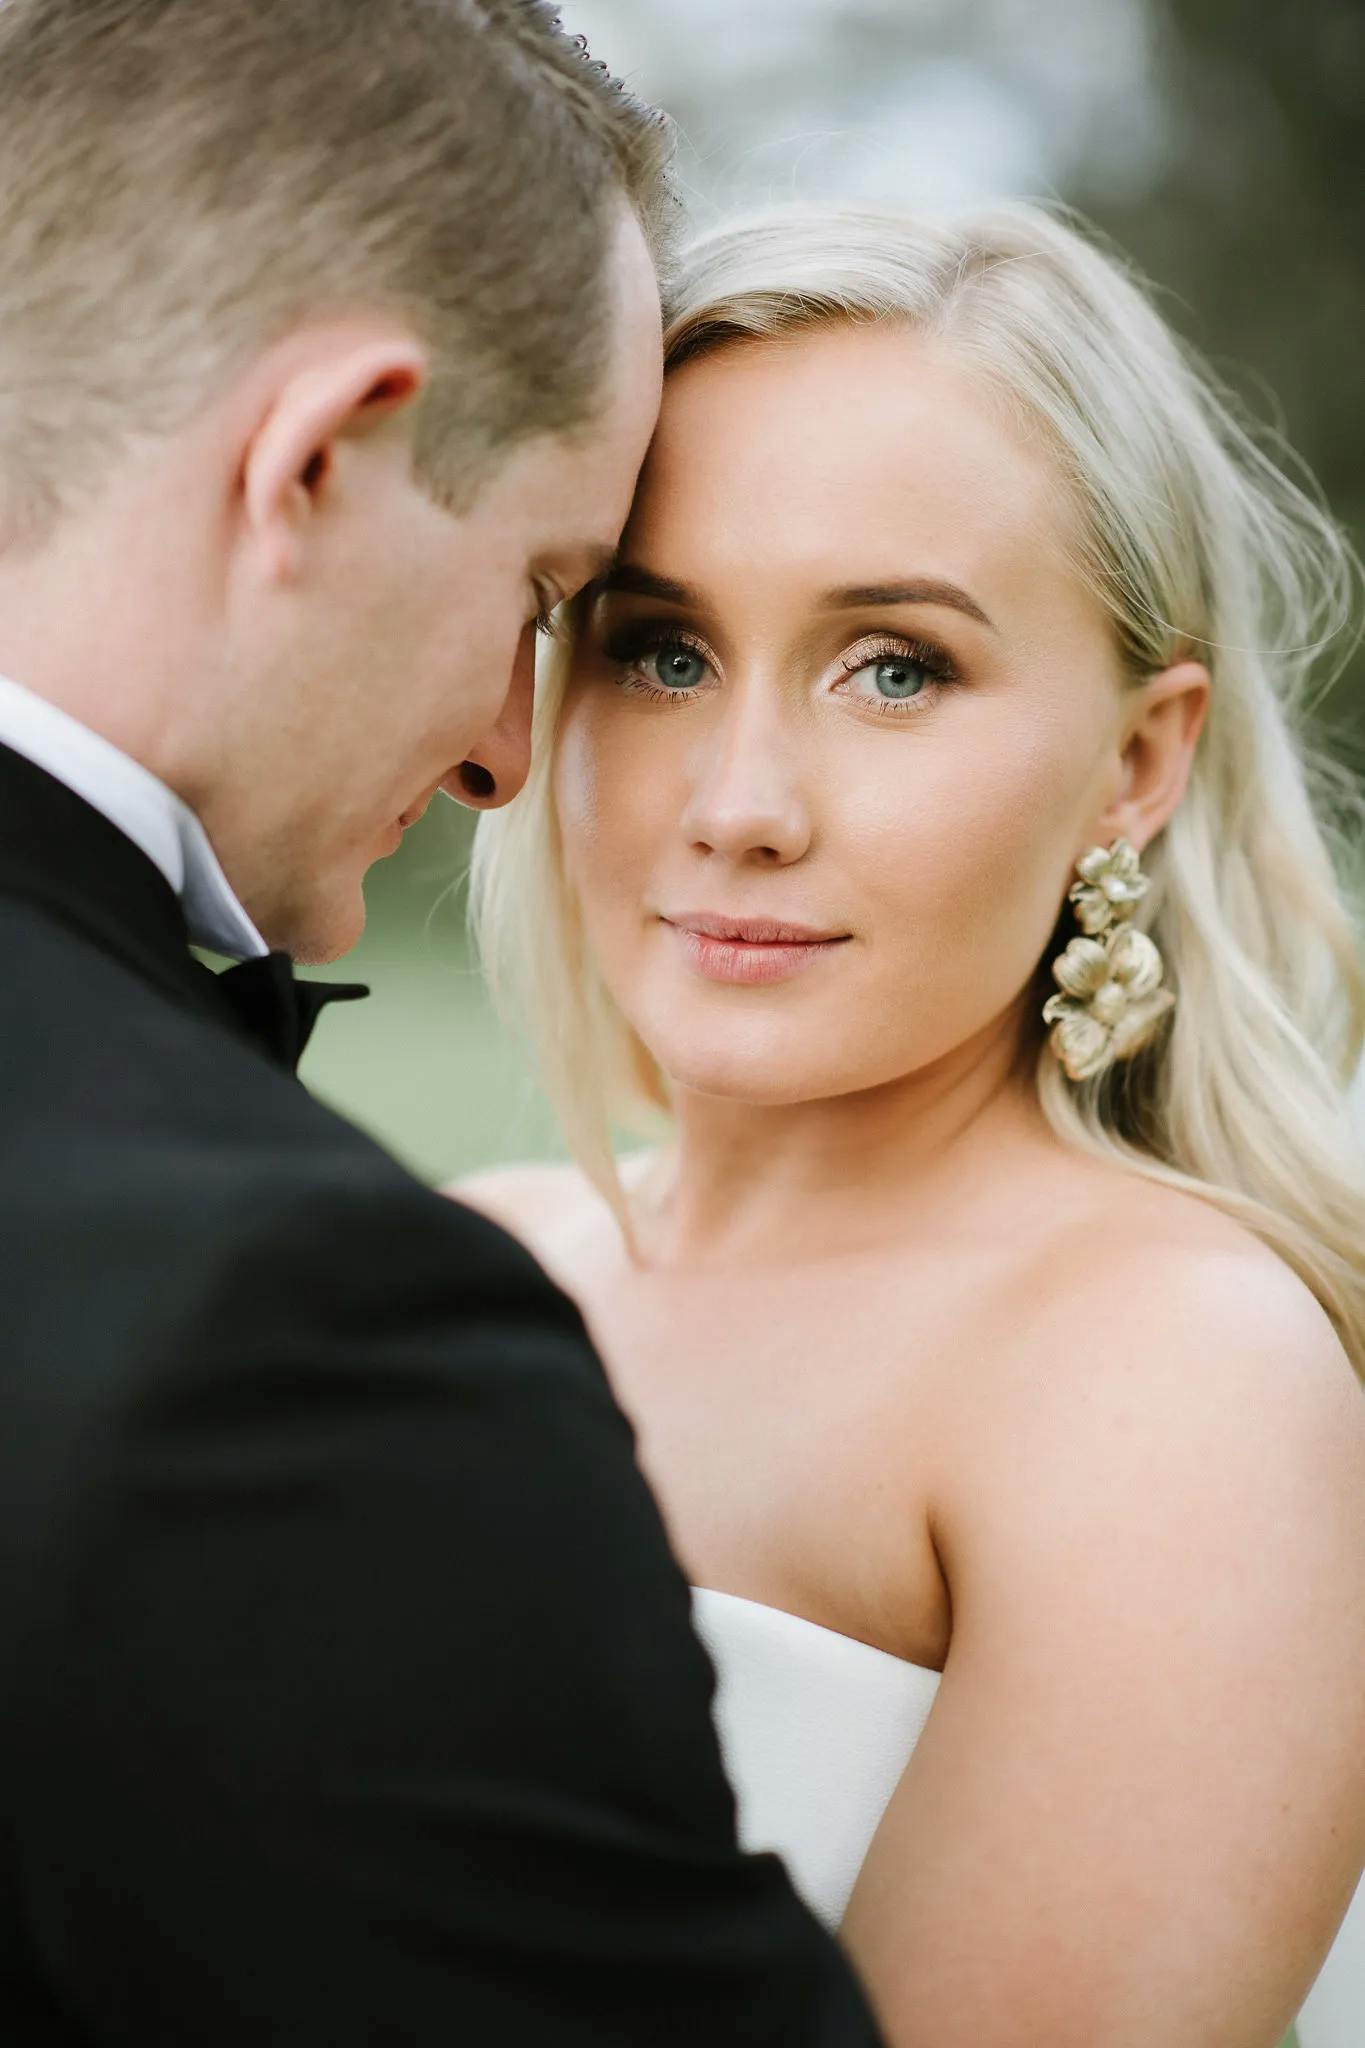 A blonde woman in a strapless white dress looks directly at the camera with a soft smile, while a man in a black suit gently rests his forehead against hers. The background is slightly blurred, emphasizing the couple's intimate moment.